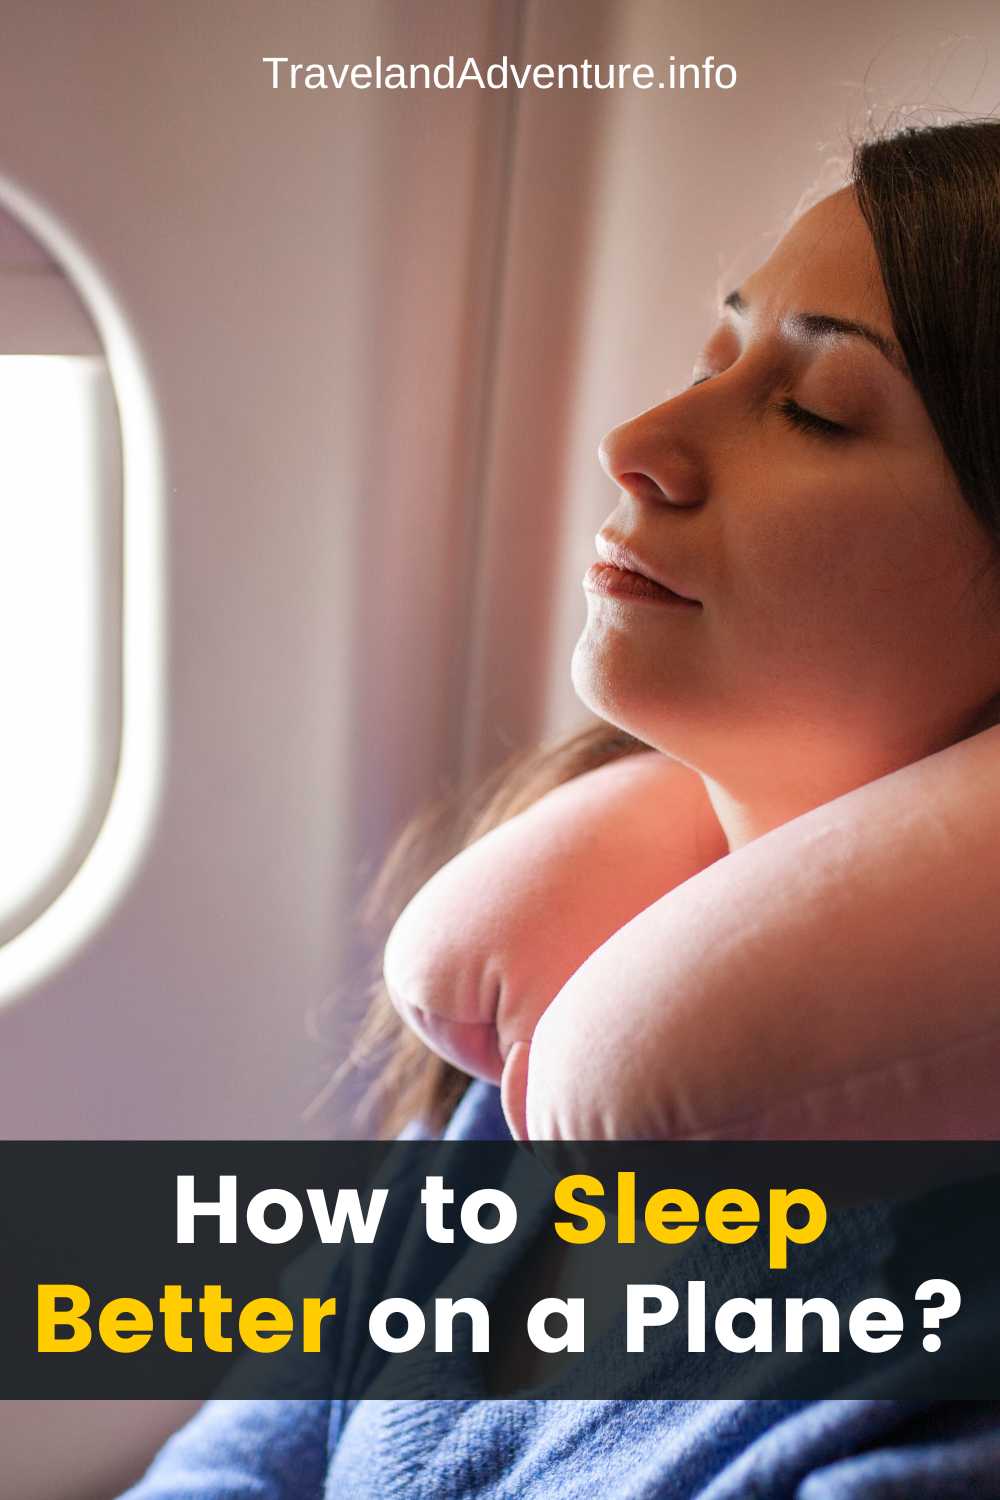 How to Sleep Better on a Plane (Tips and Tricks for a Restful Flight)